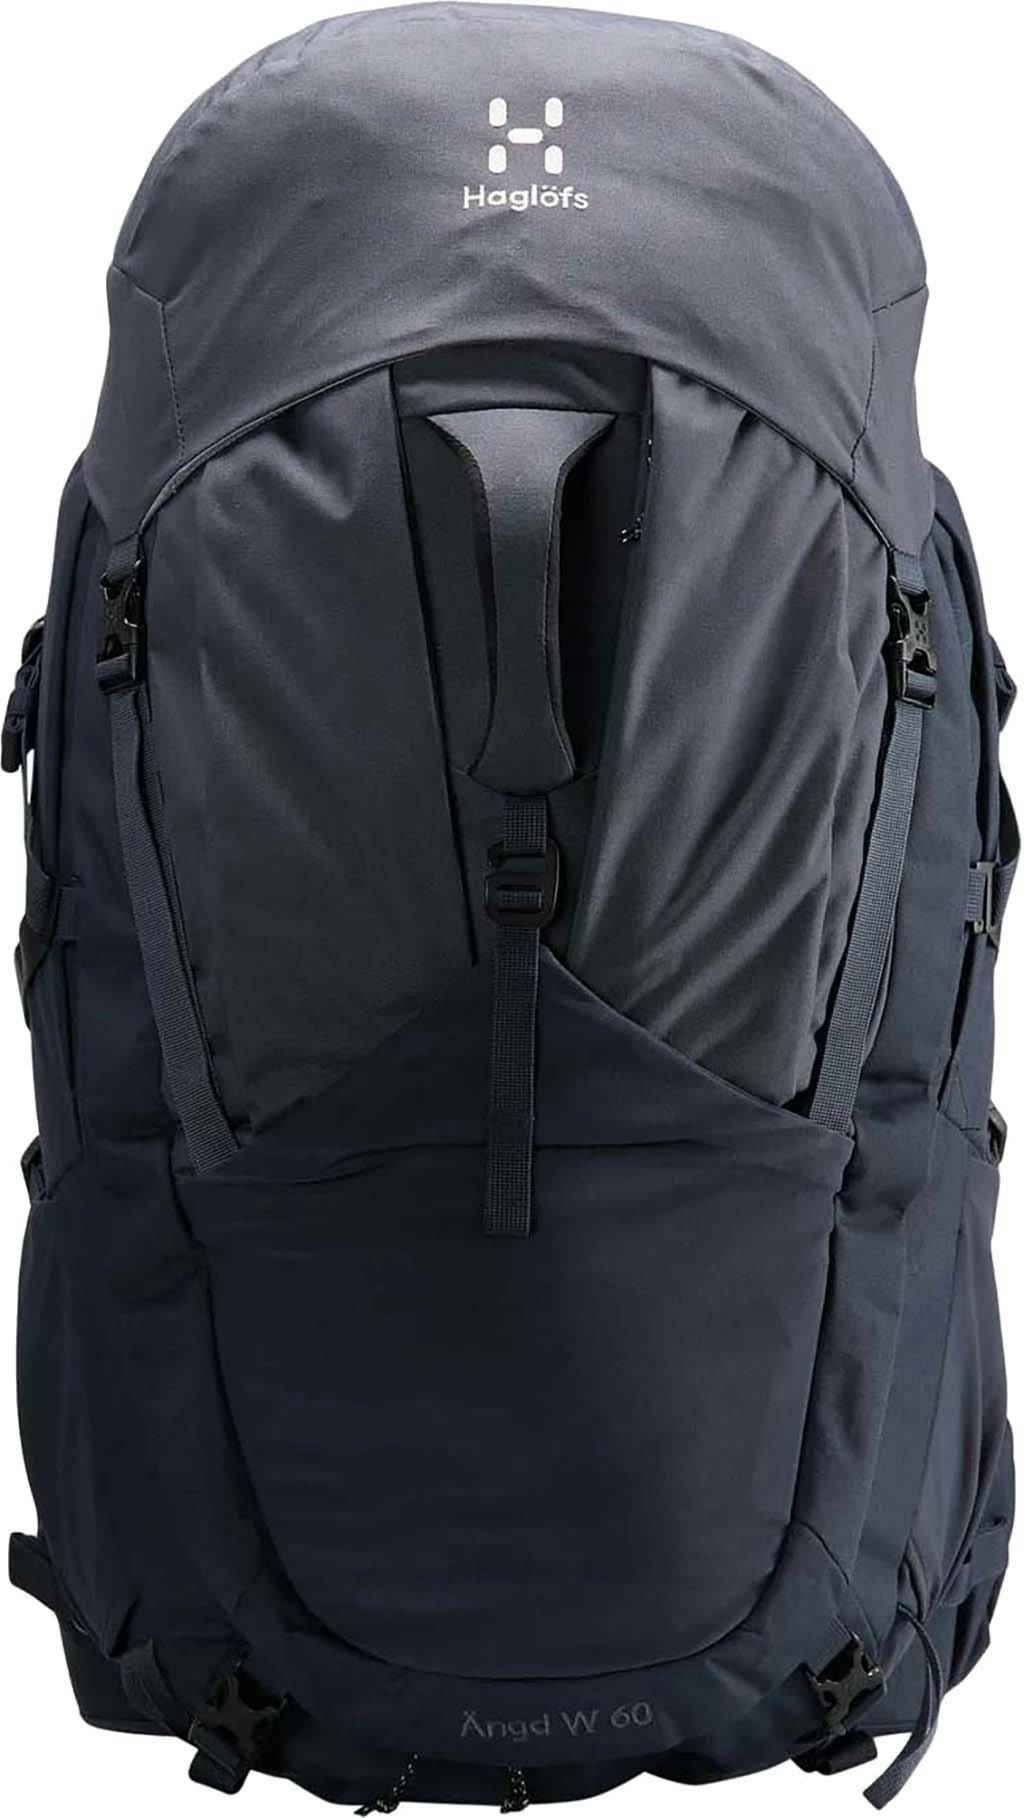 Product image for Ängd 60 Backpack - Women's